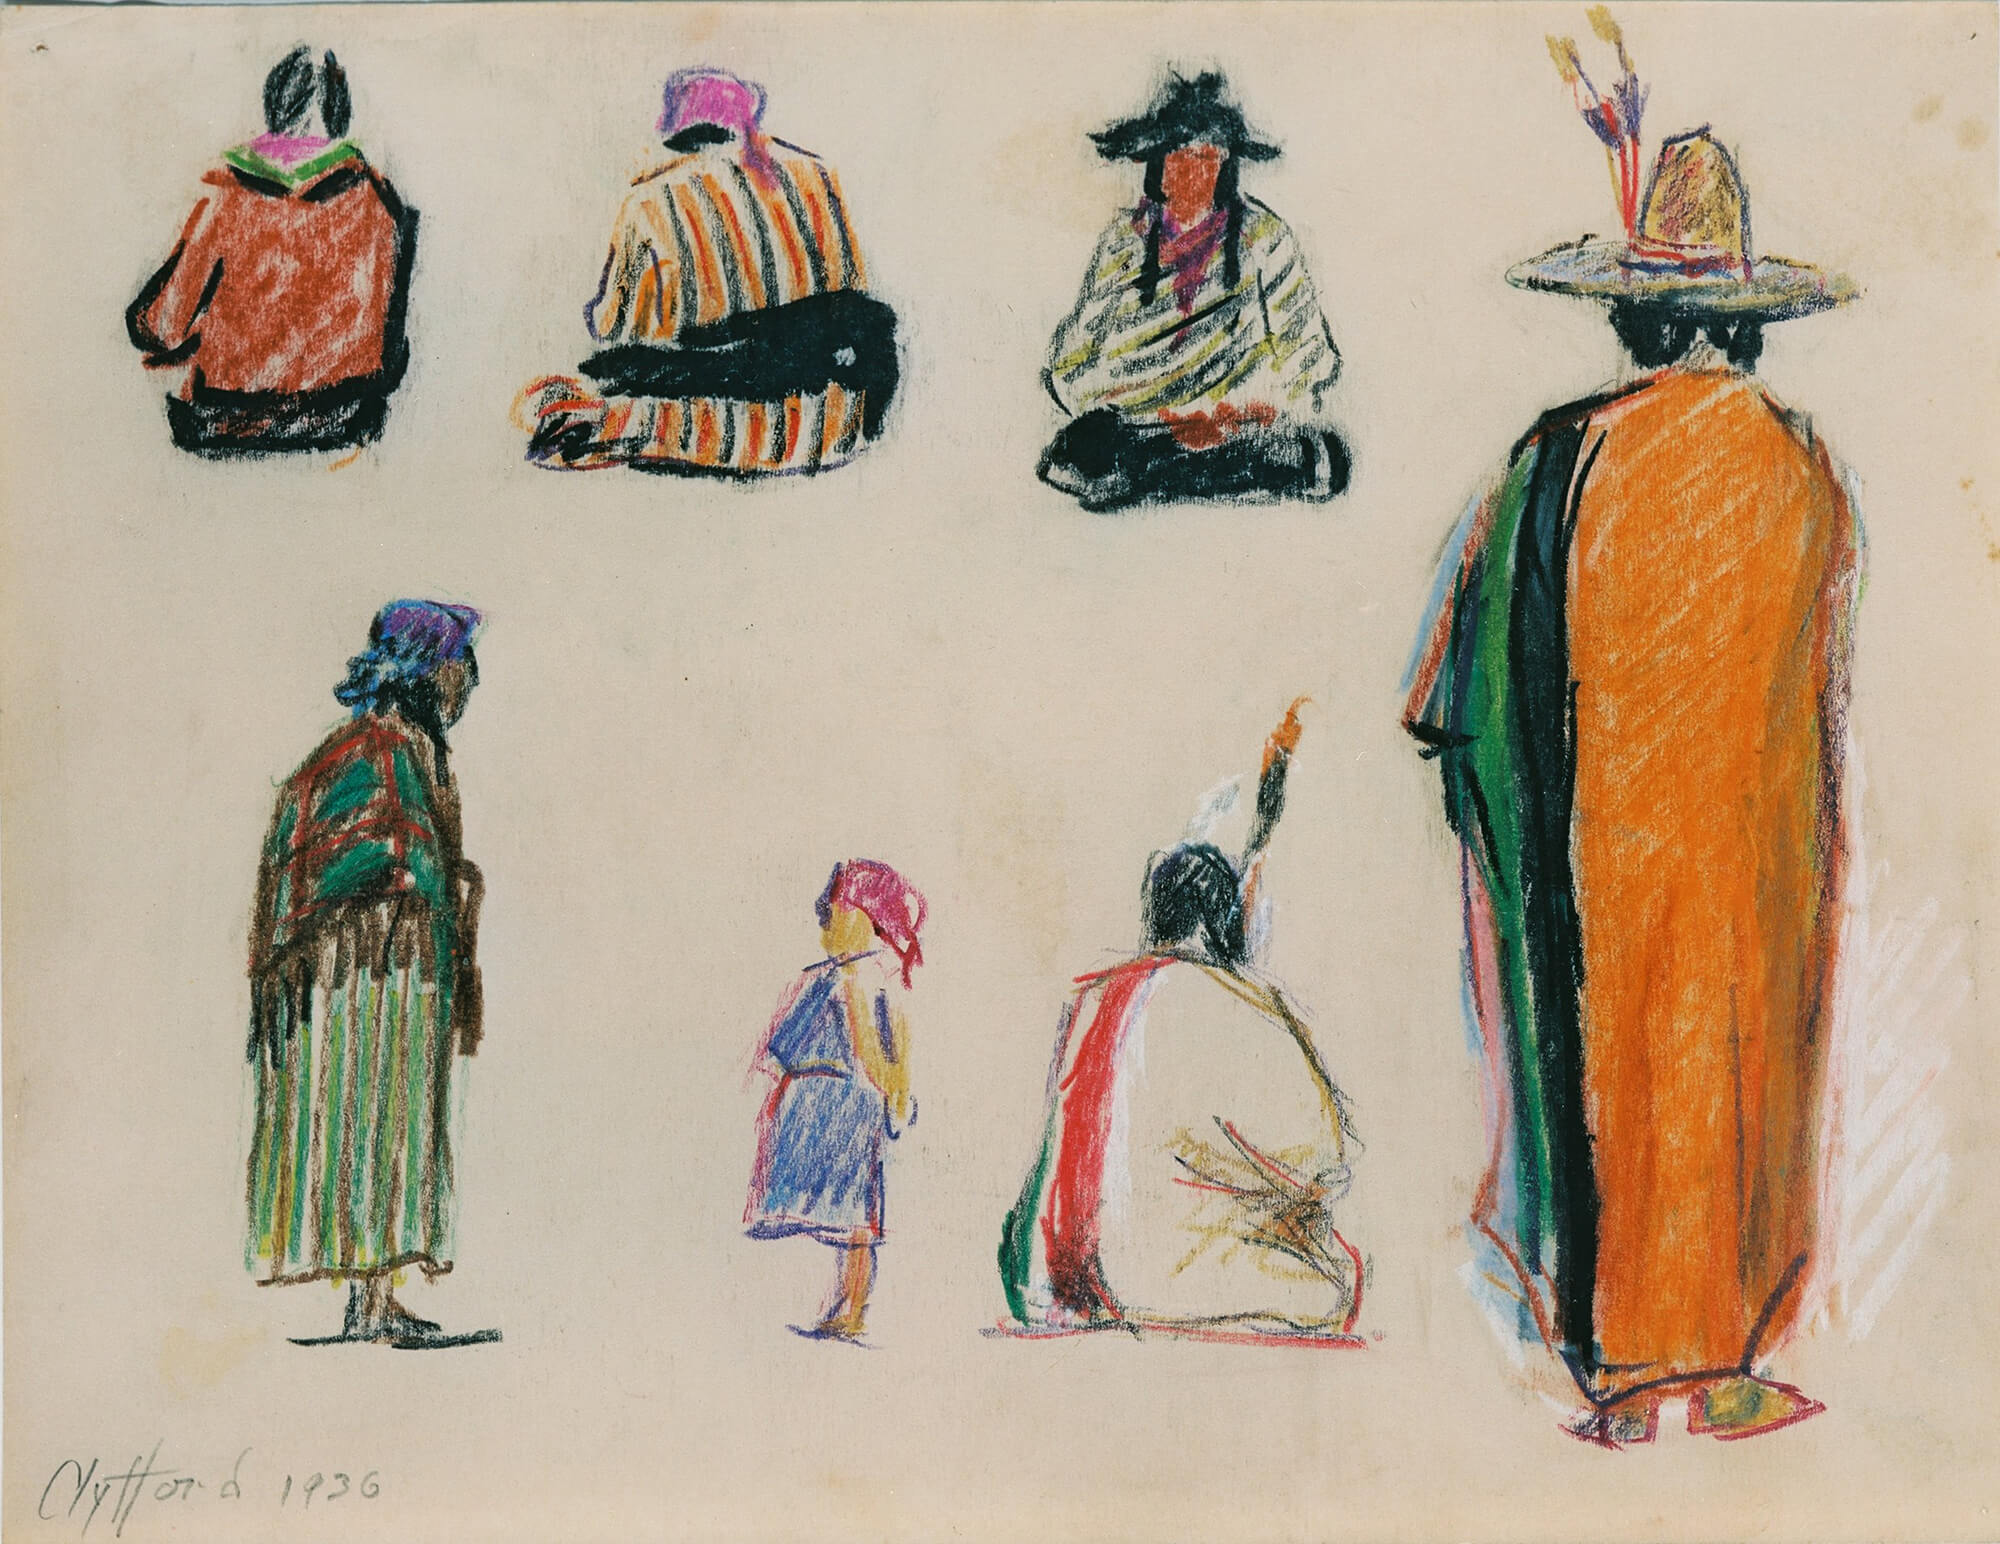 Pastel and crayon on paper drawing of seven Native American figures